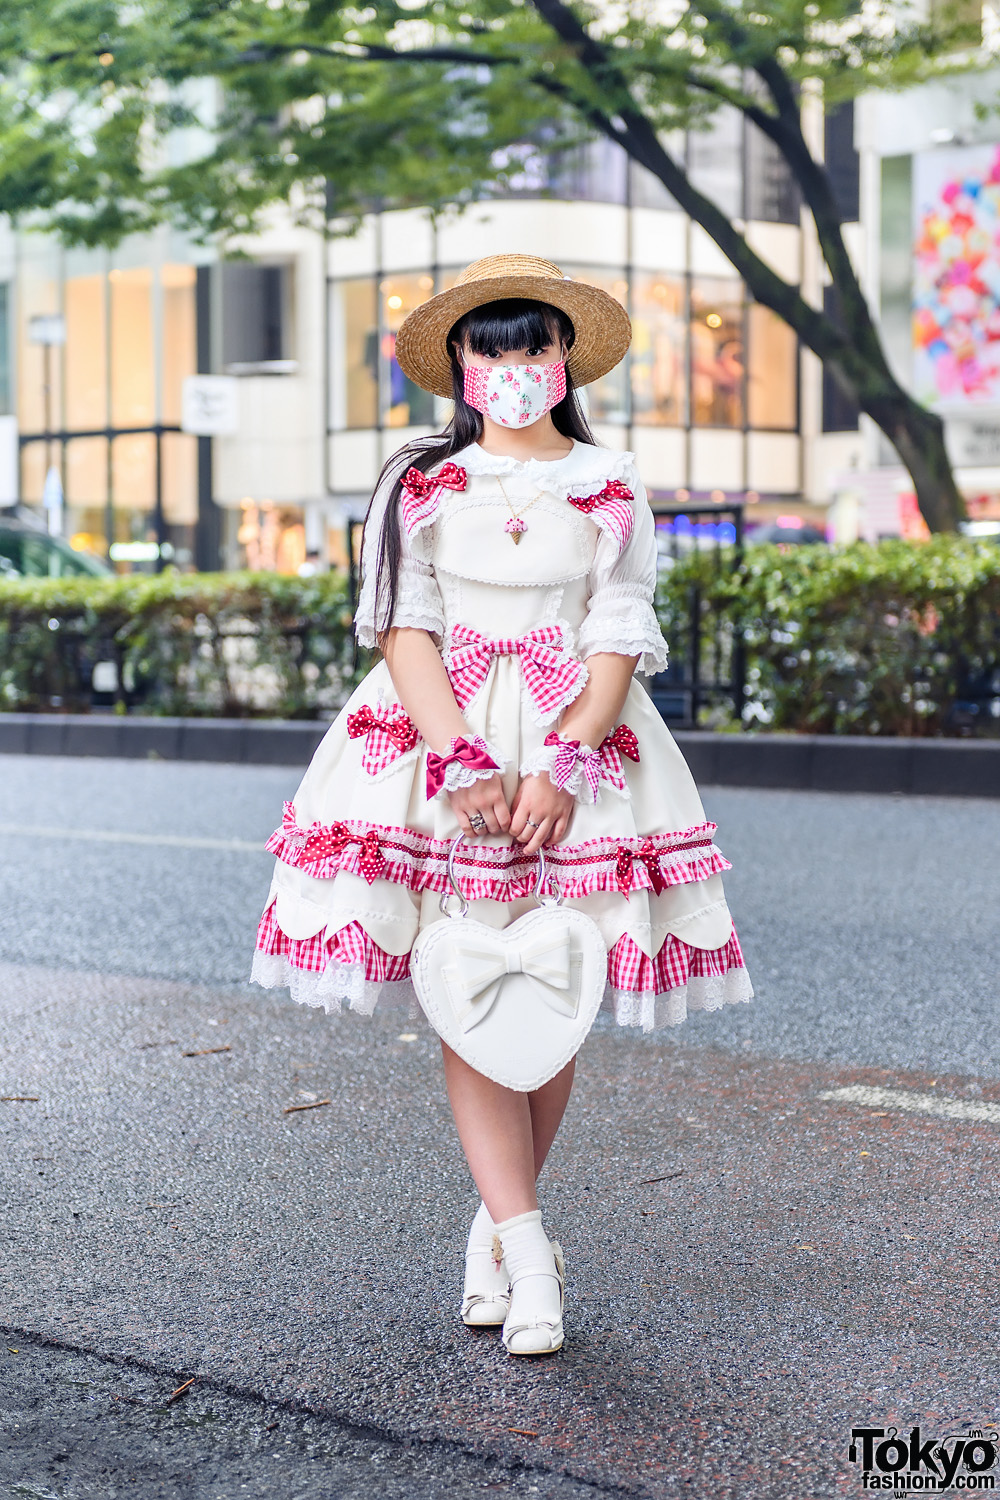 Baby, The Stars Shine Bright Sweet Lolita Street Style w/ Straw Hat, Floral Face Mask, Ice Cream Necklace, Bow Dress, Heart Bag & Bow Shoes